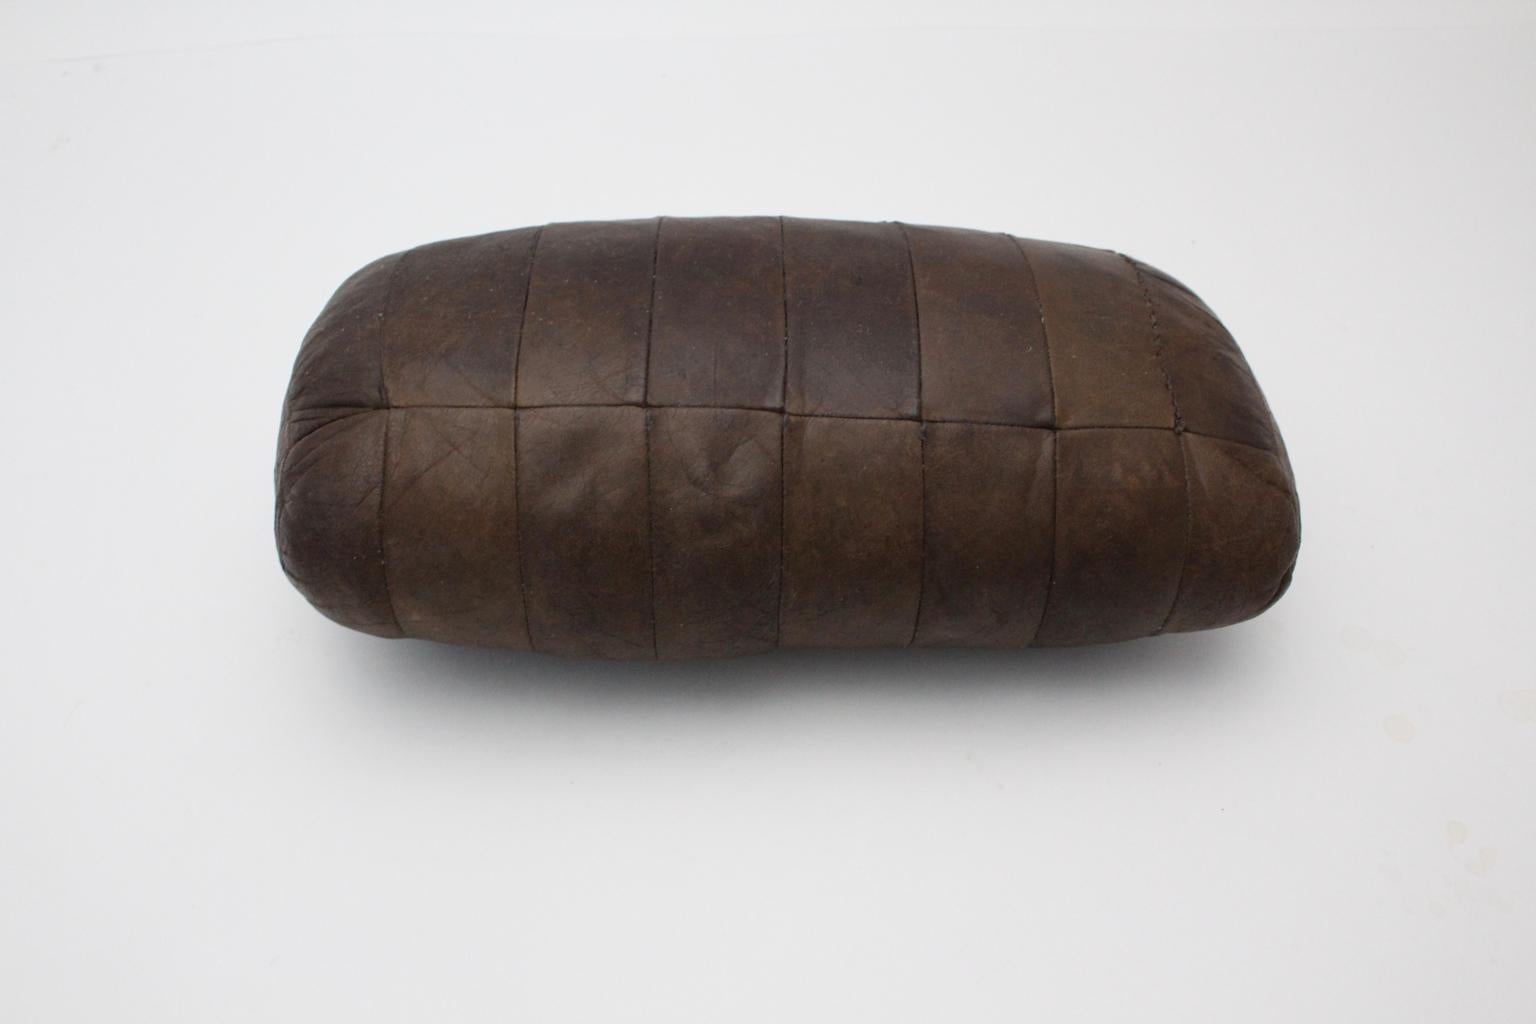 A mid century modern vintage pillow by De Sede 1970, Switzerland, was made of brown leather patchwork and shows a charming leather patina. The condition is fair.
Approximate measures:
Width 50 cm
Depth 24 cm
Height 16 cm.